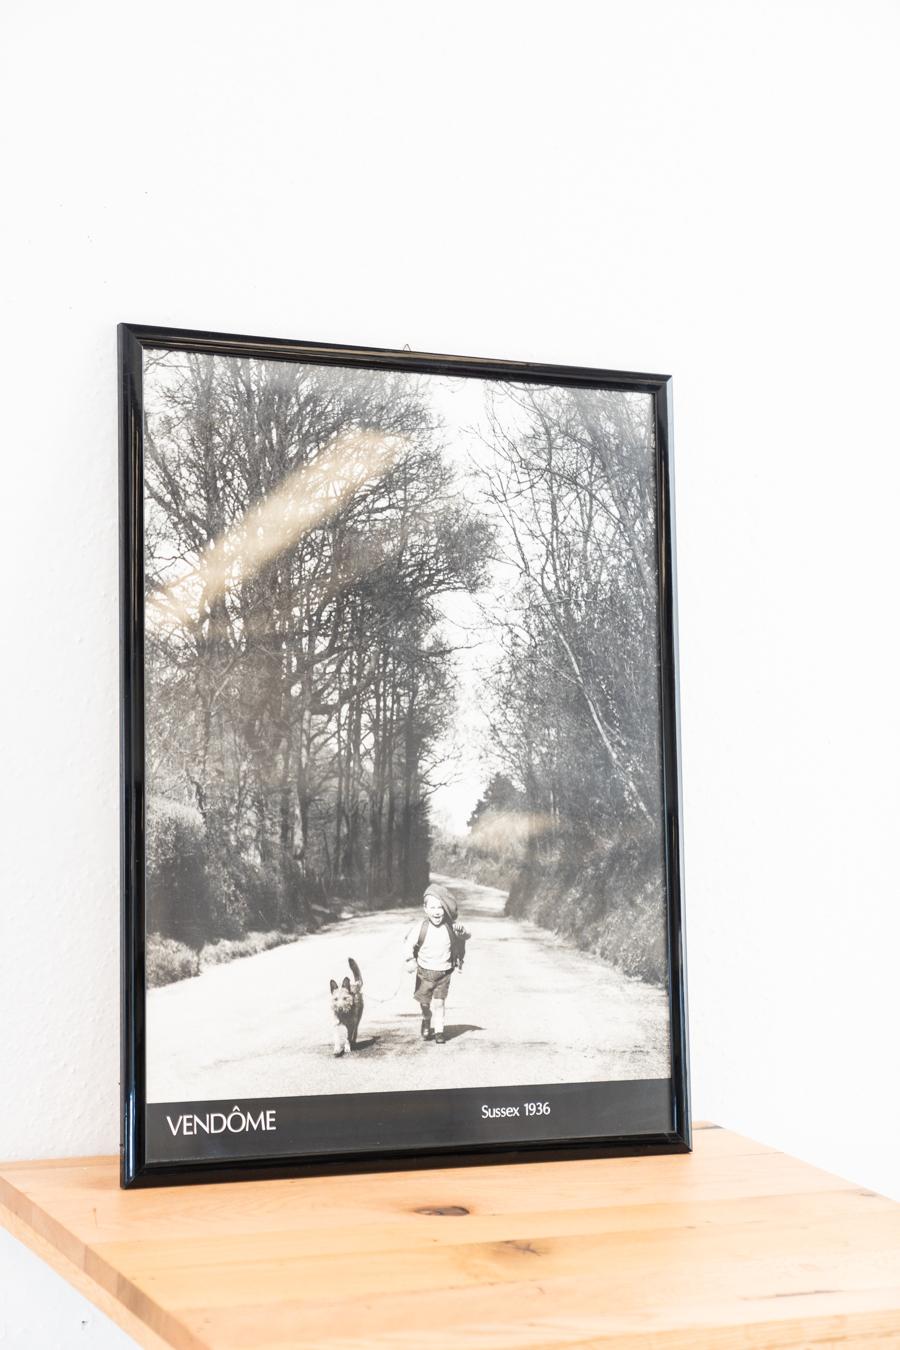 Black and white print with child and dog walking, 2000
Modern Italian style
Design period After 2000
Production period 2000 - 2009
Year of manufacture 2000
Country of production Italy
Material Paper, Wood
Color White, Black
Light weight: less than